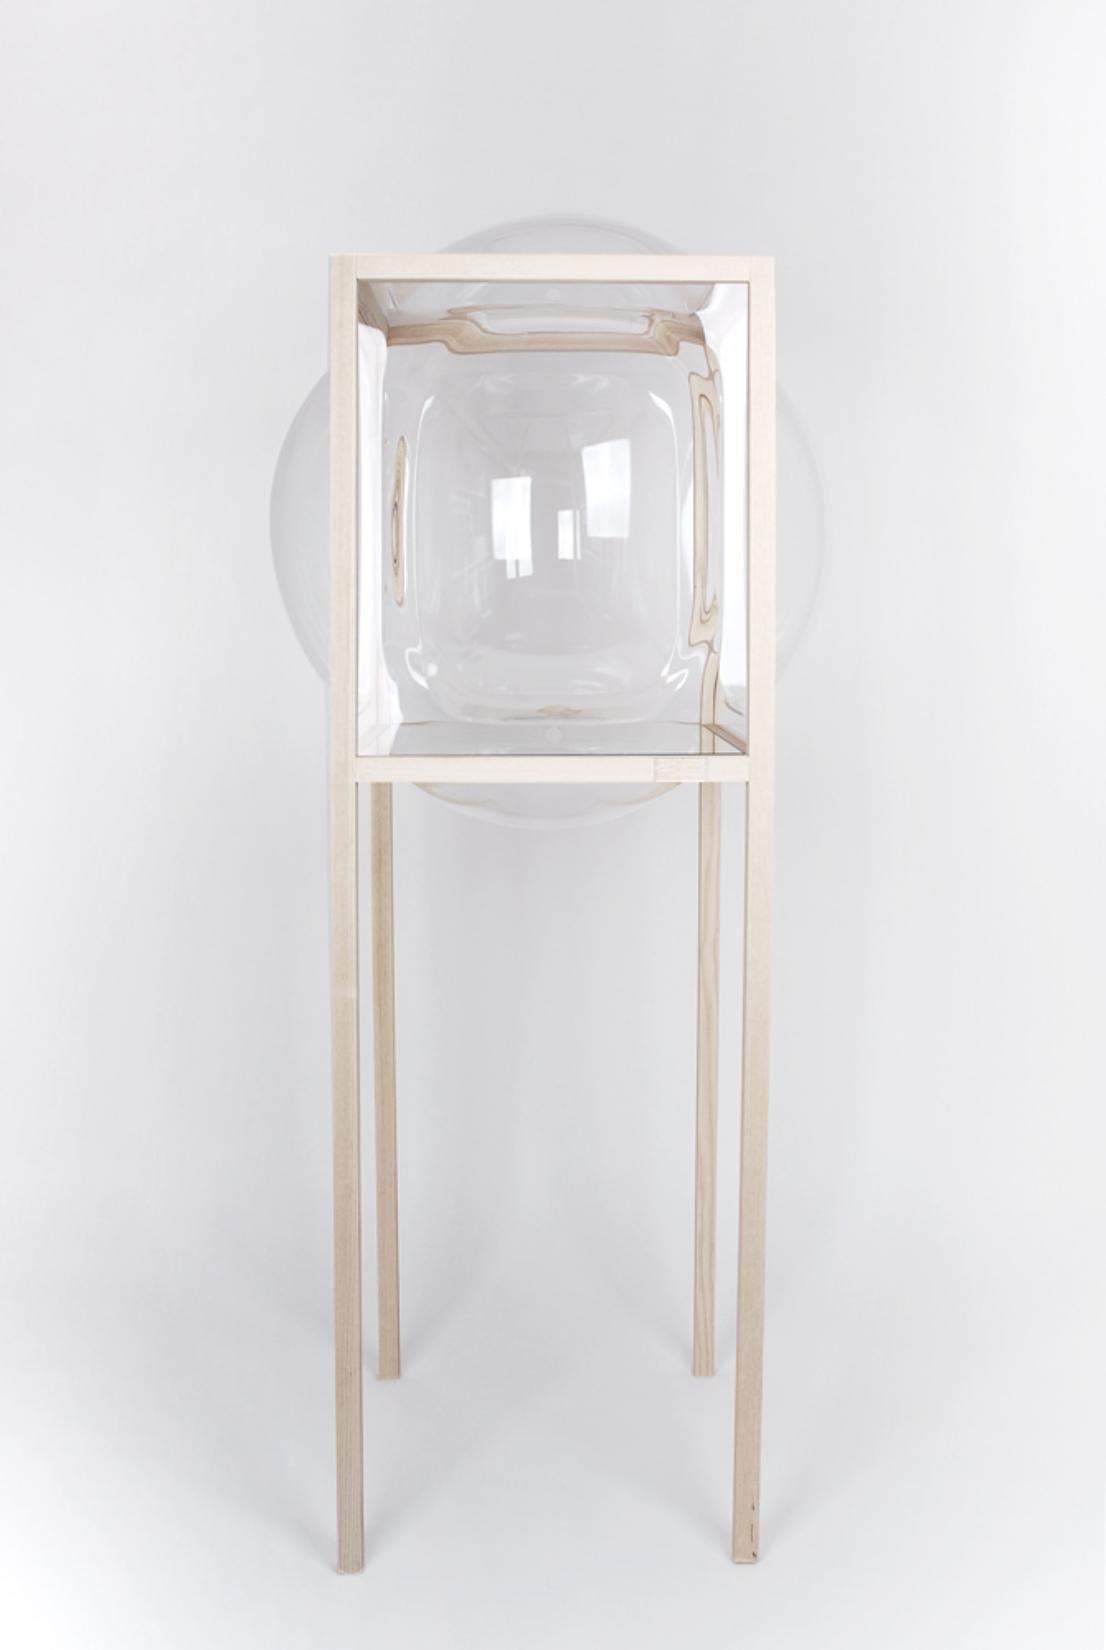 High Standing Curator Bubble Cabinet by Studio Thier & van Daalen
Dimensions: W 65 x D 65 x H 138 cm
Materials: Ash, Acrylic Glass, Glass
Also Available: Extra options available,

These bubbles in a wooden frame brighten up your day! As if your